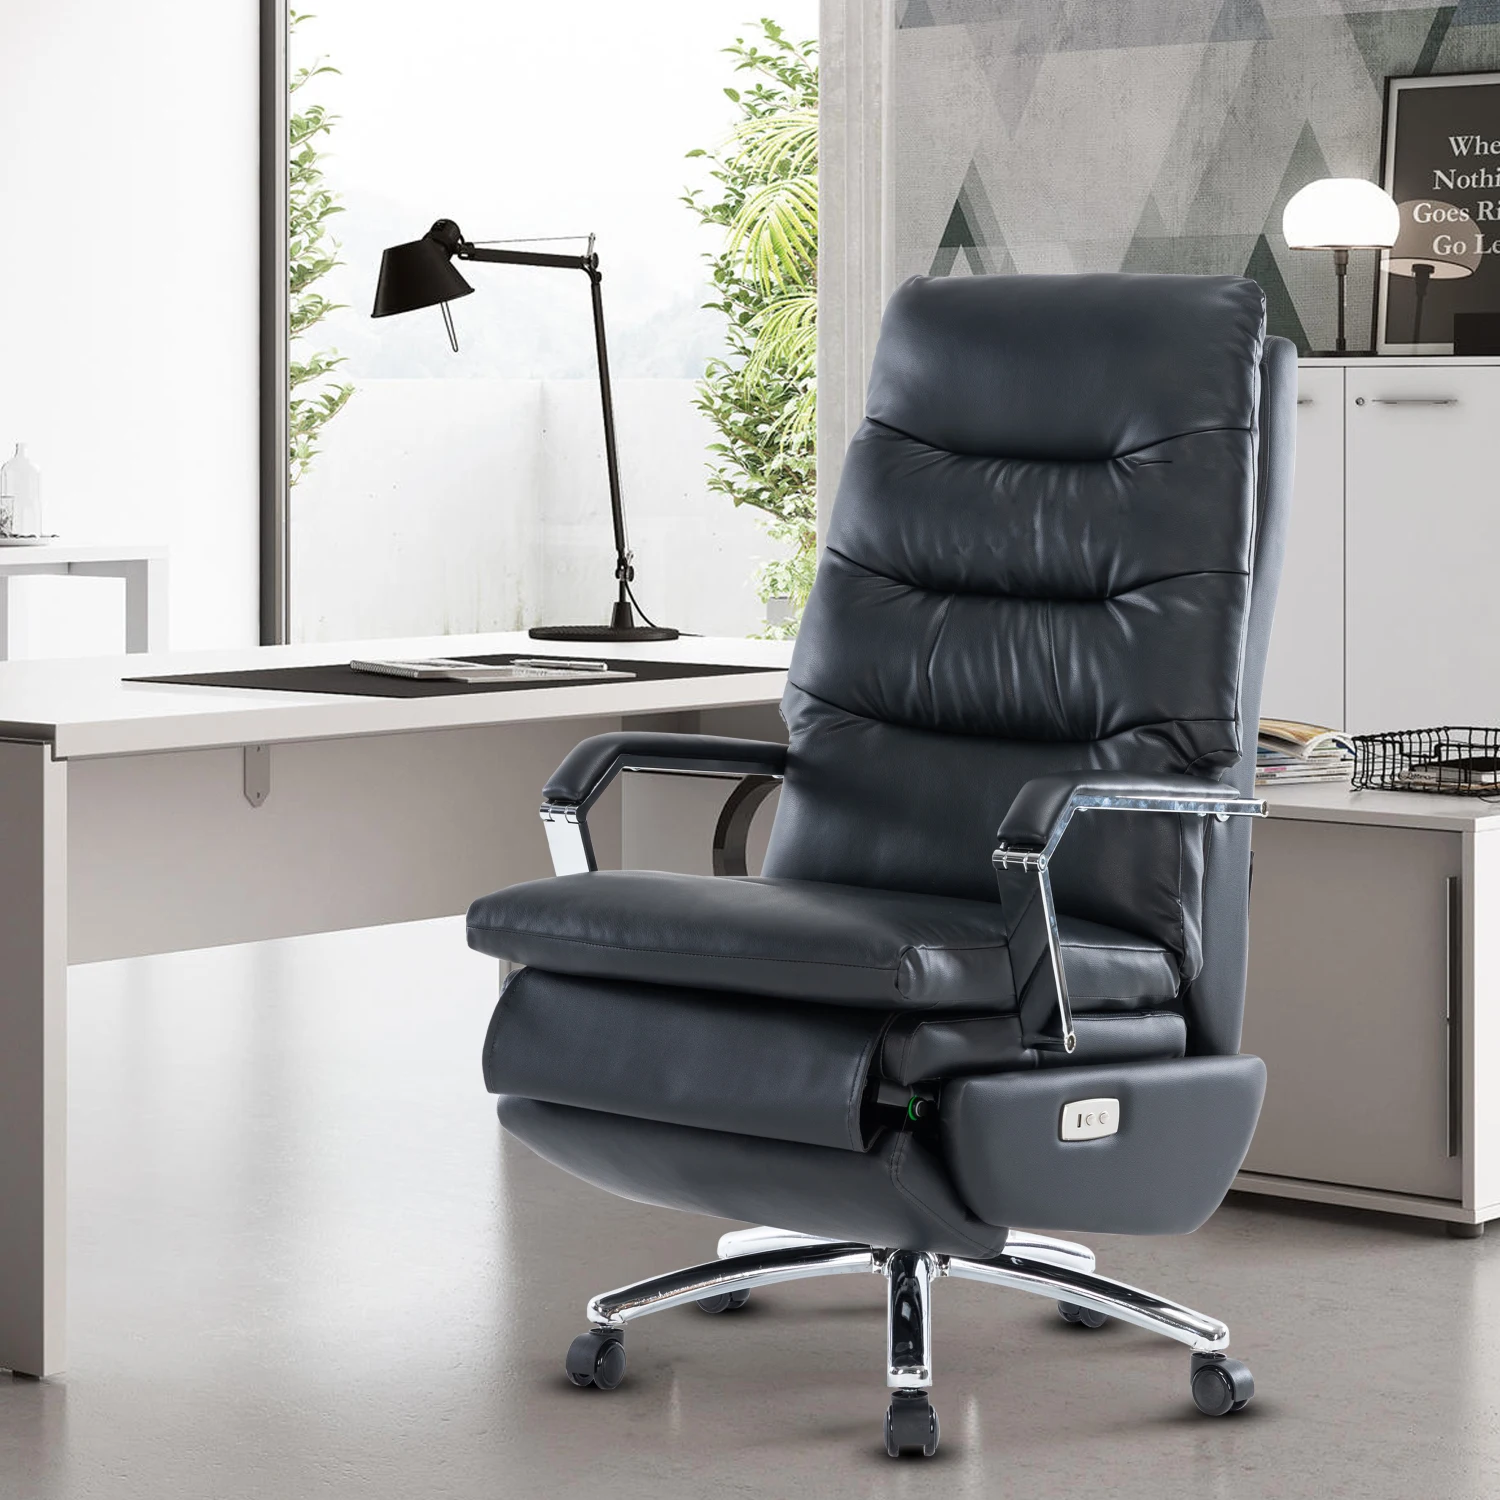 

Comfortable Reclining Power Office Chair with Footrest for Big and Tall Users - Heavy Duty Power Desk Chair with Auto-Linked Arm